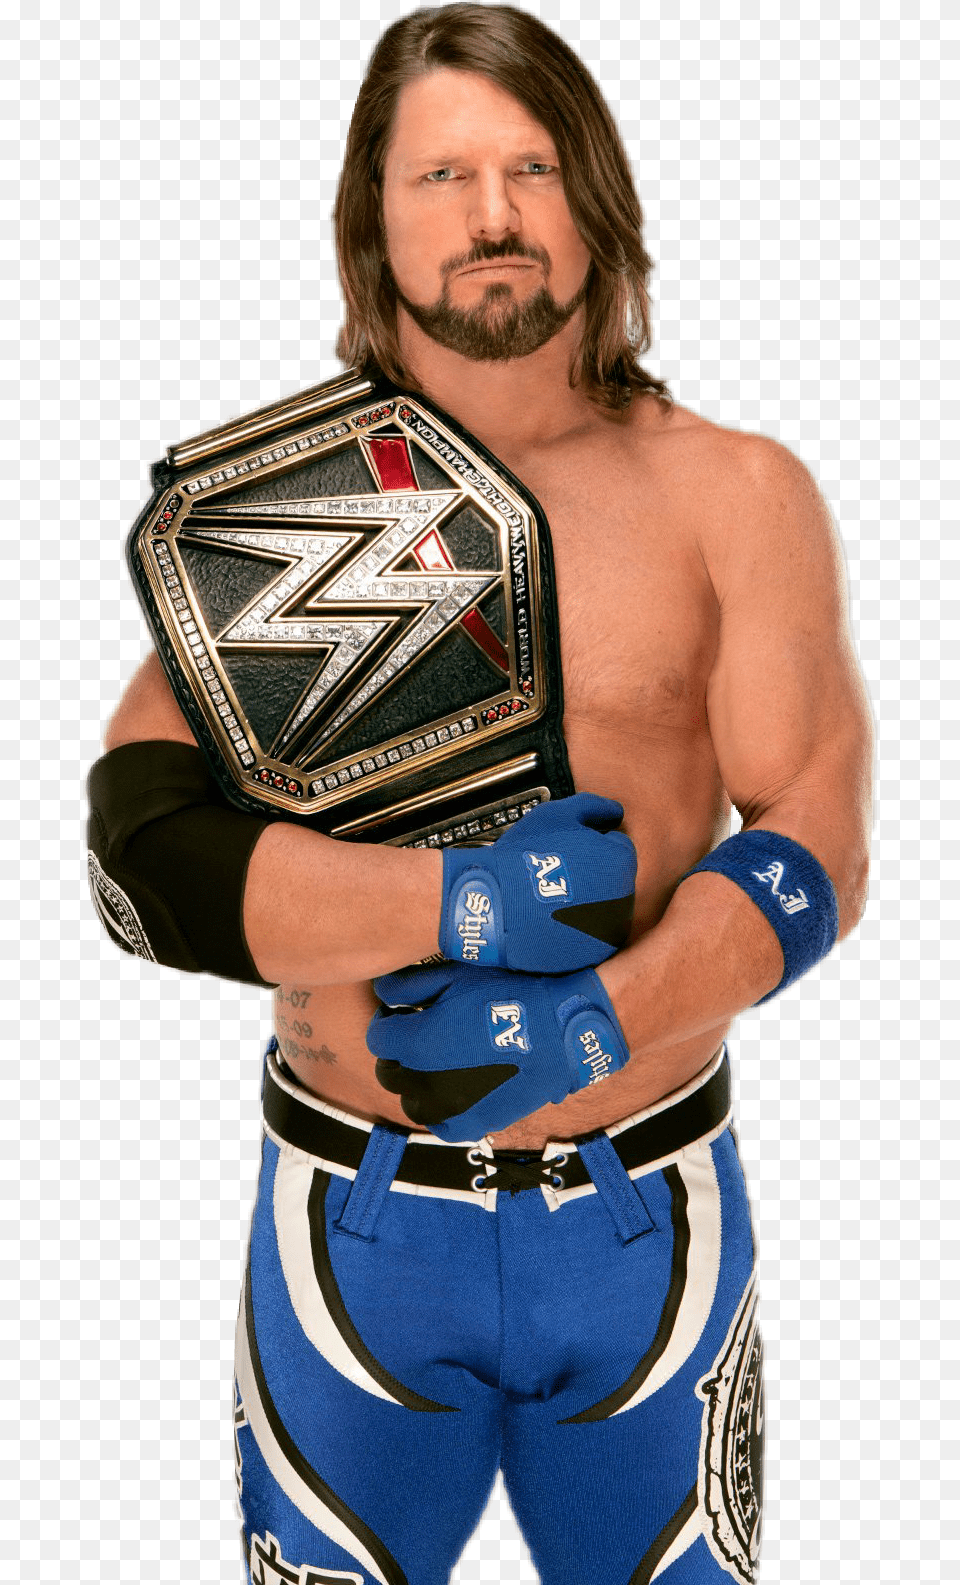 Ajstyles Wwe Styles Aj Champion Wrestling Wrestler Wwe Aj Styles Wwe Champion, Glove, Clothing, Accessories, Adult Free Png